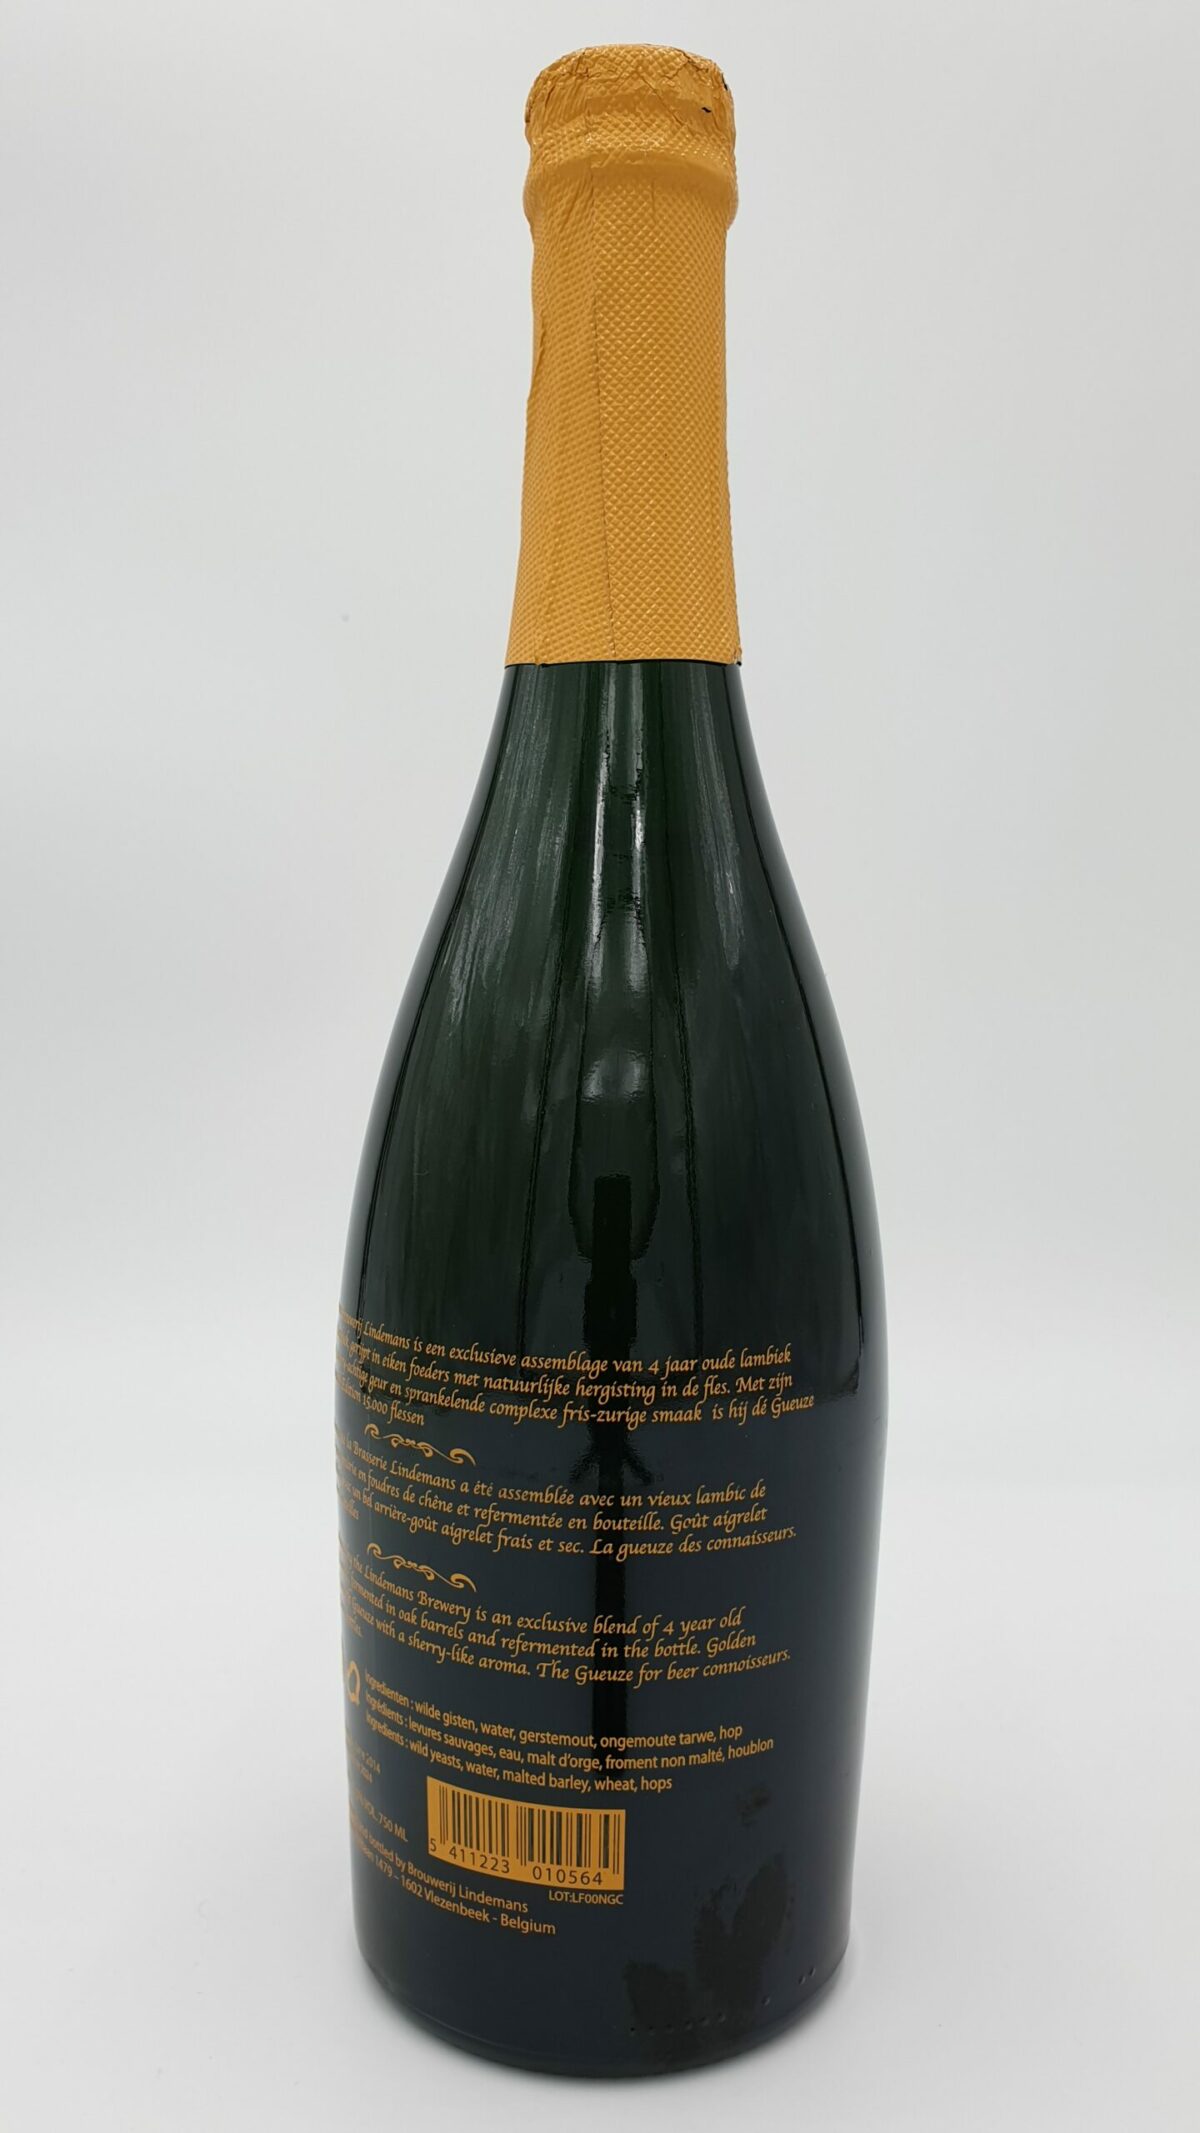 lindemans cuvee rene special blend 2010  limited edition